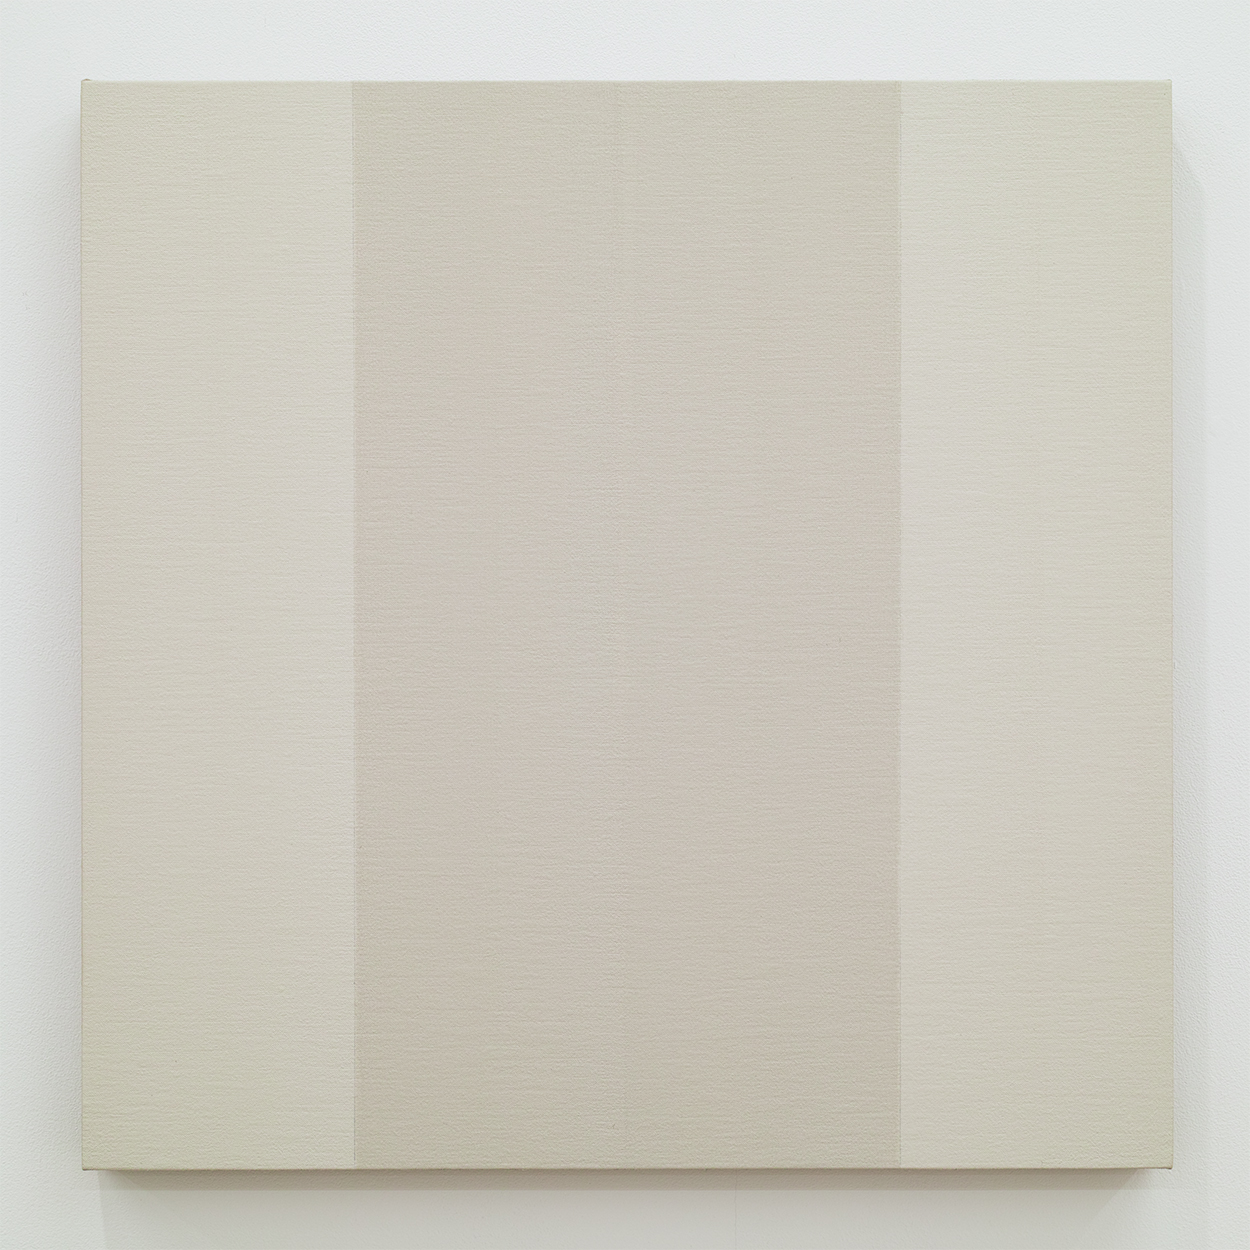 TS902｜Gesso on linen on panel｜45 x 45 cm｜2009